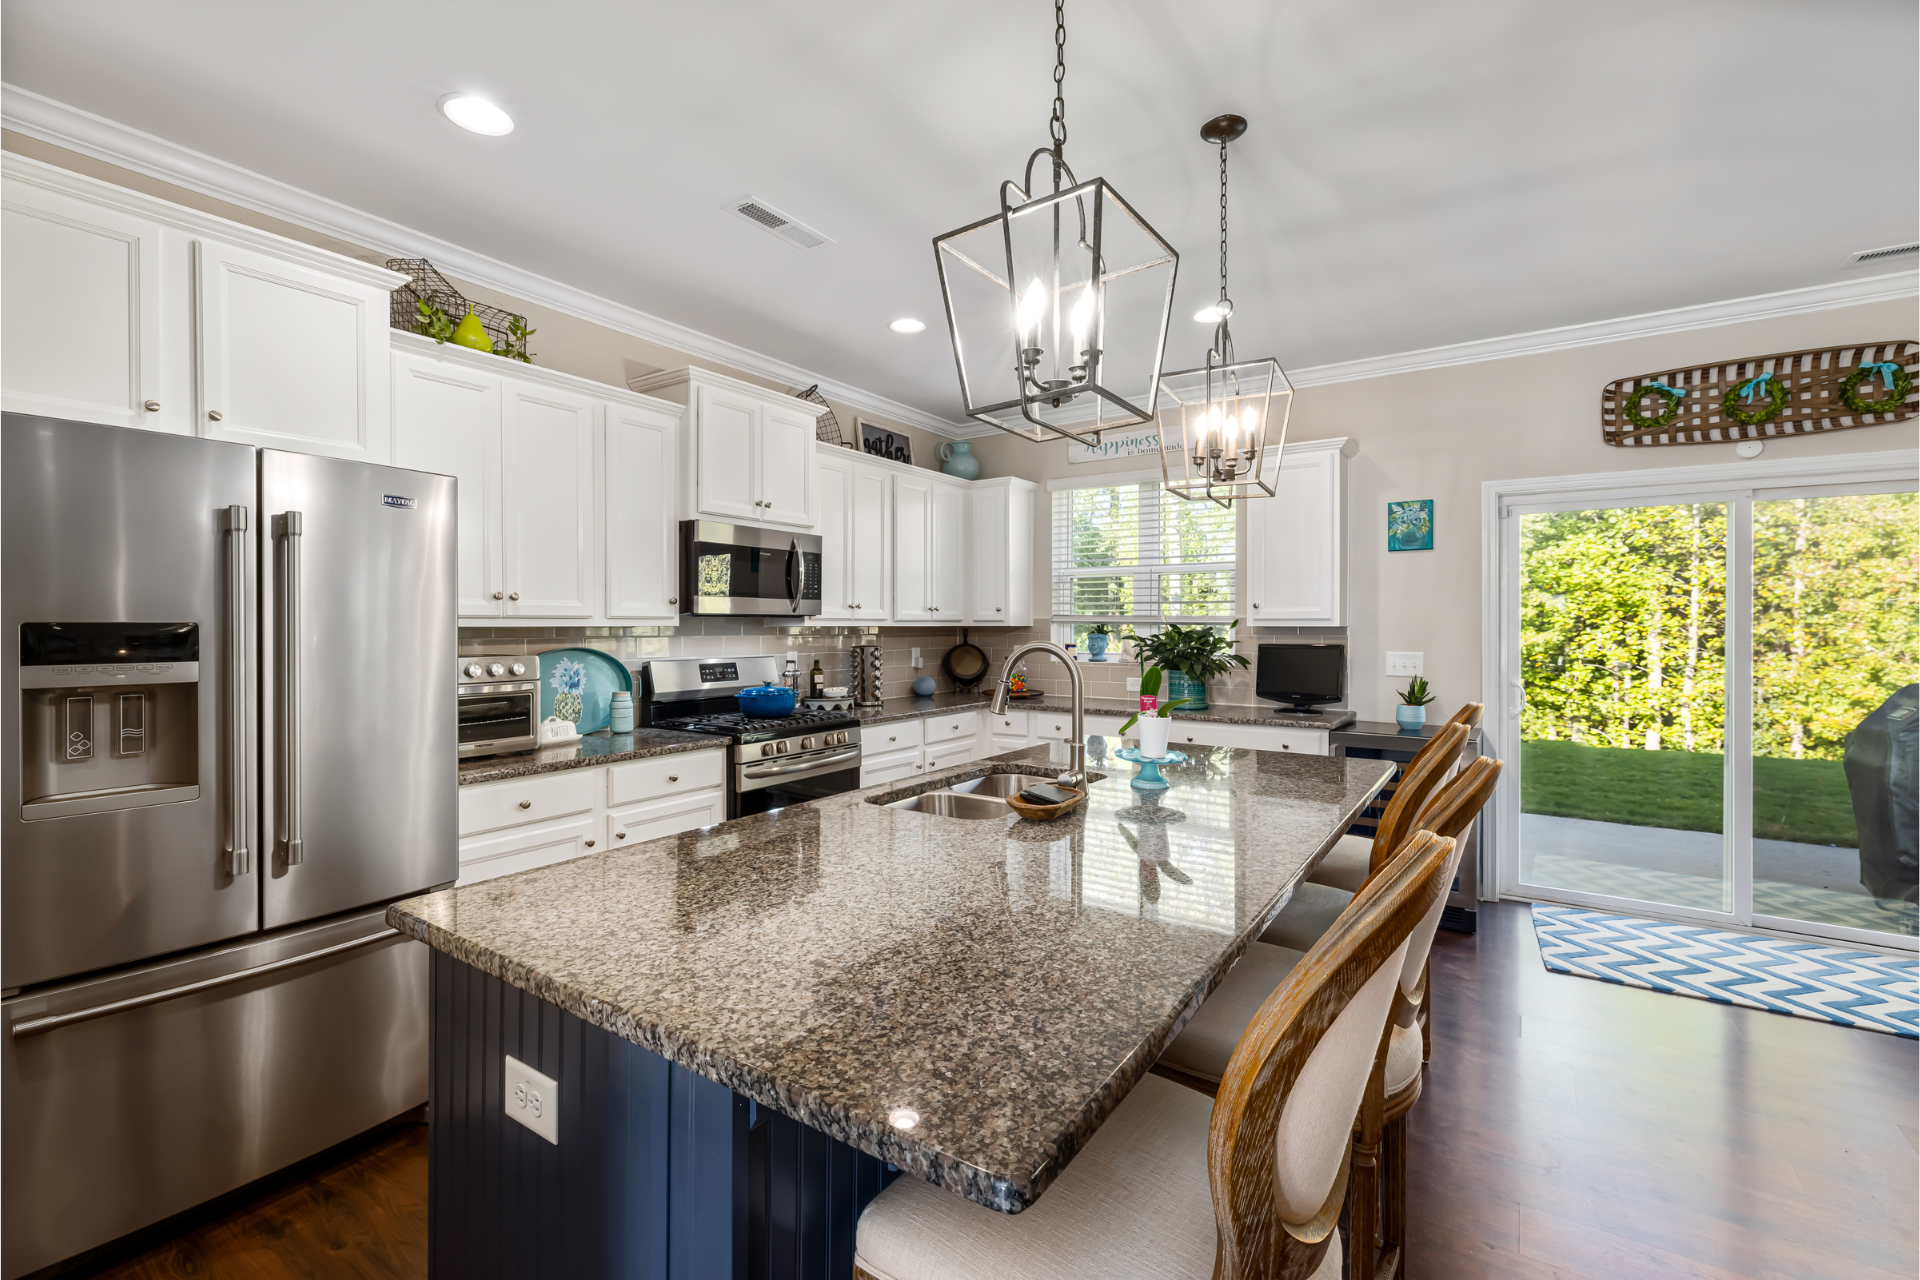 A large clean kitchen with granite countertops